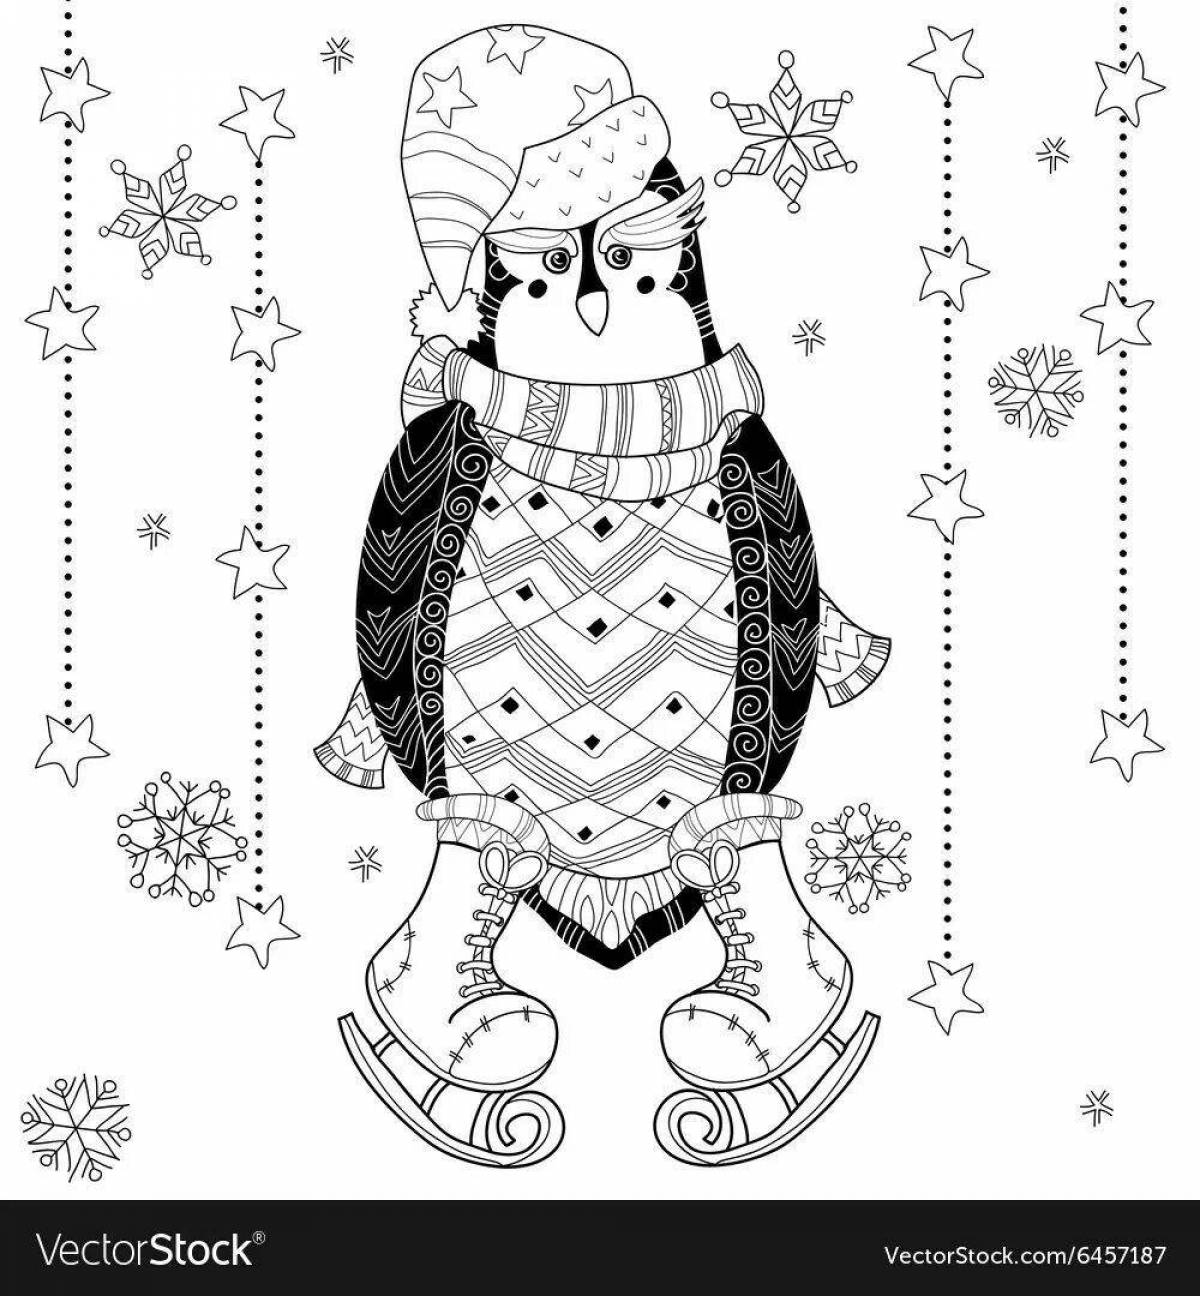 Glowing Christmas penguin coloring page